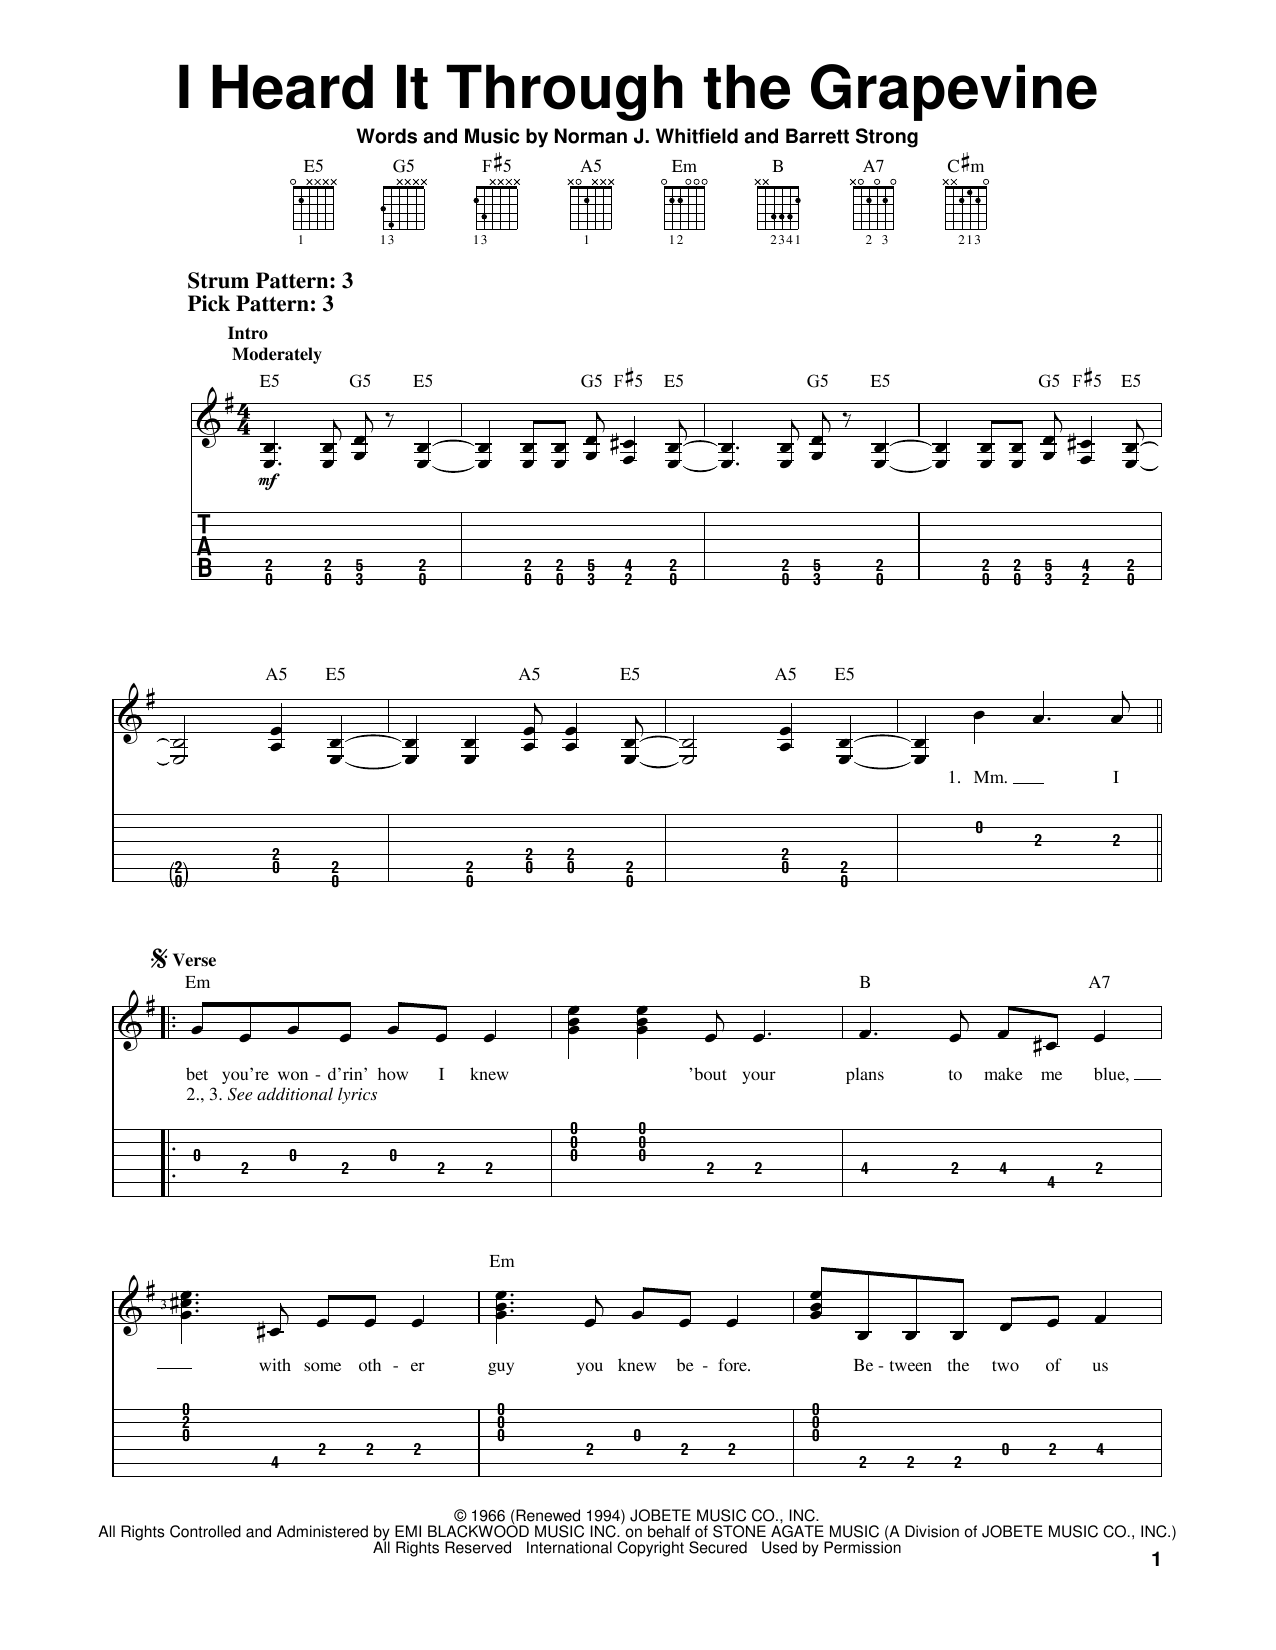 Download Creedence Clearwater Revival I Heard It Through The Grapevine Sheet Music